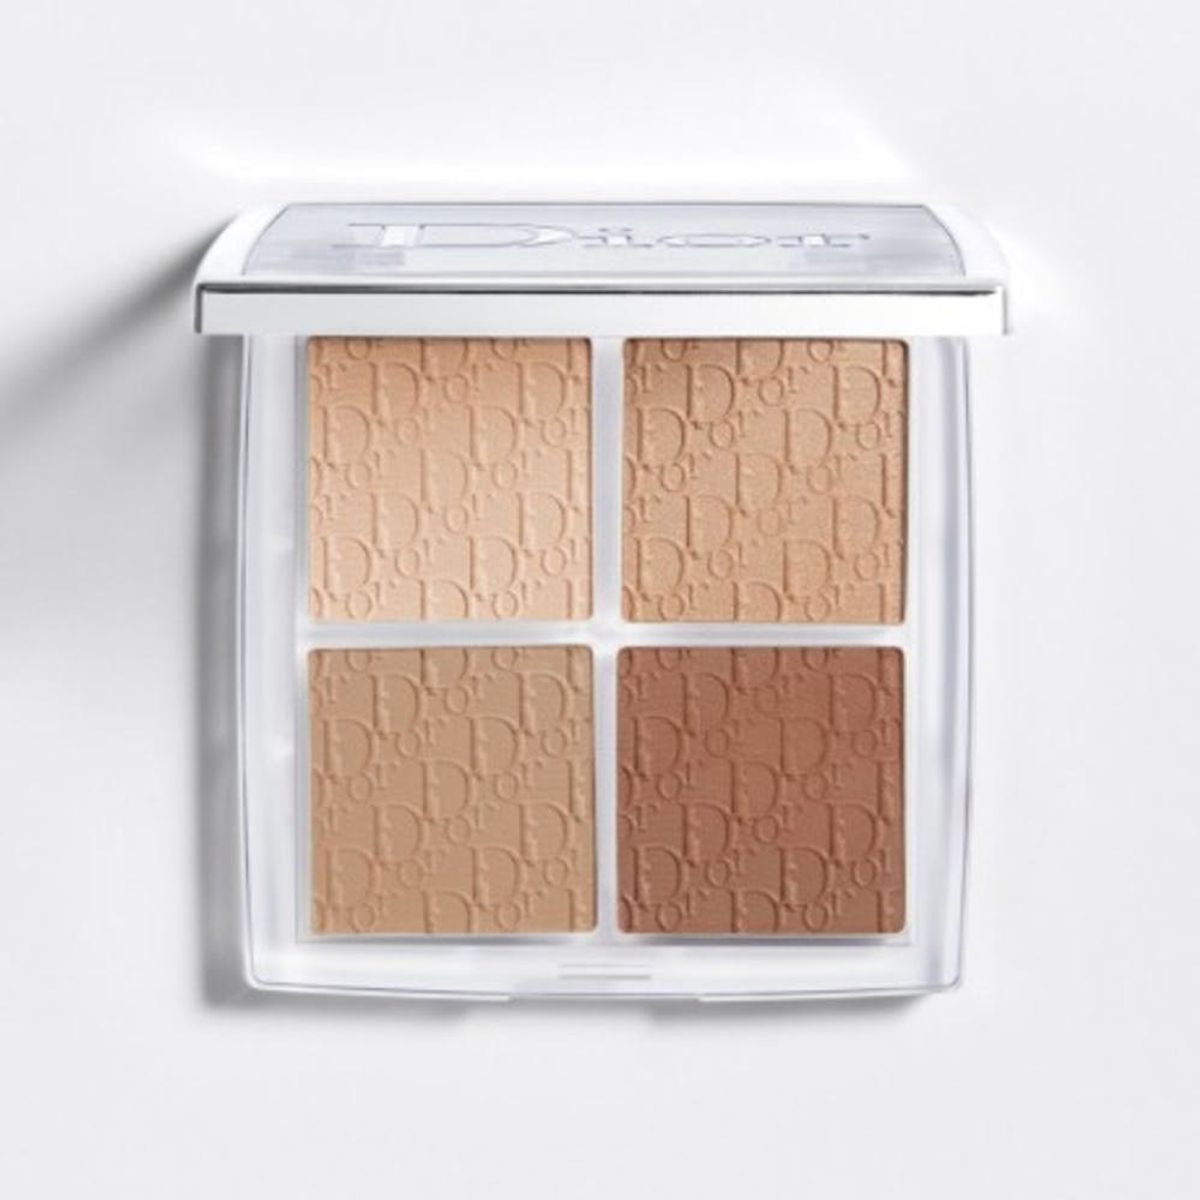 The Best Contour Palettes and Sticks, According to Makeup Artists